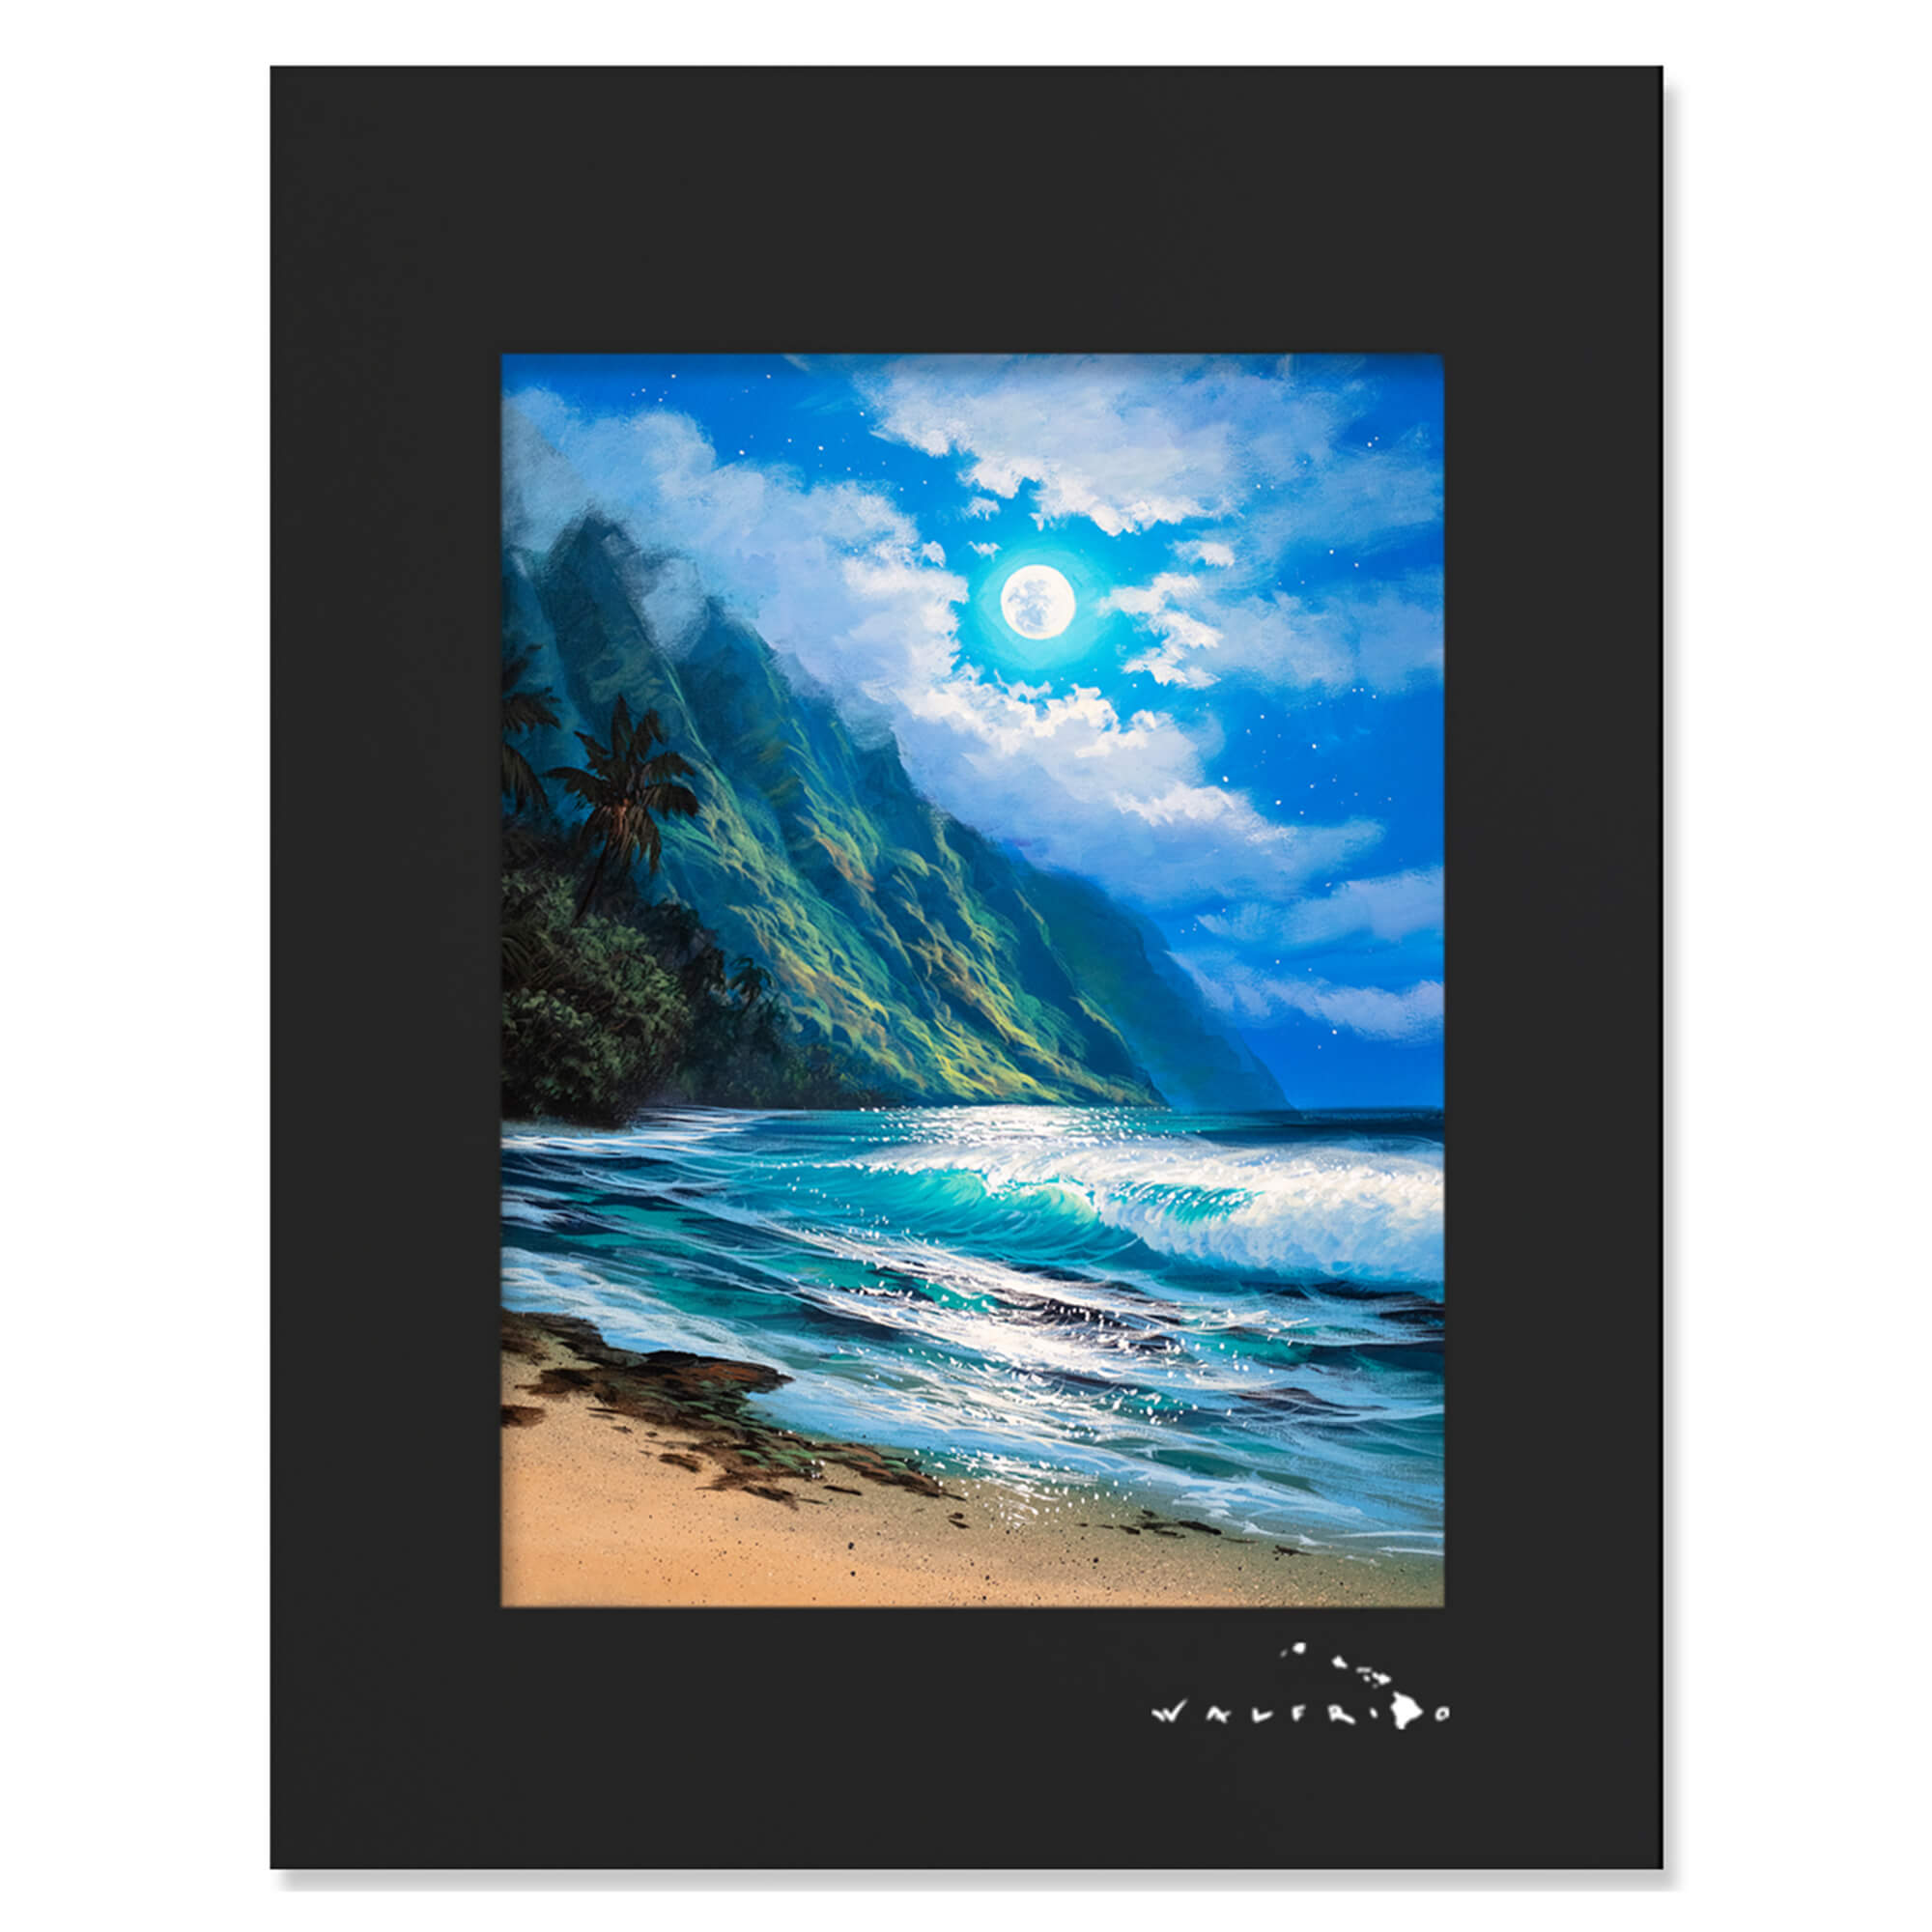 A matted art print depicting a moonlit seascape surrounded by dramatic mountains by Hawaii artist Walfrido Garcia